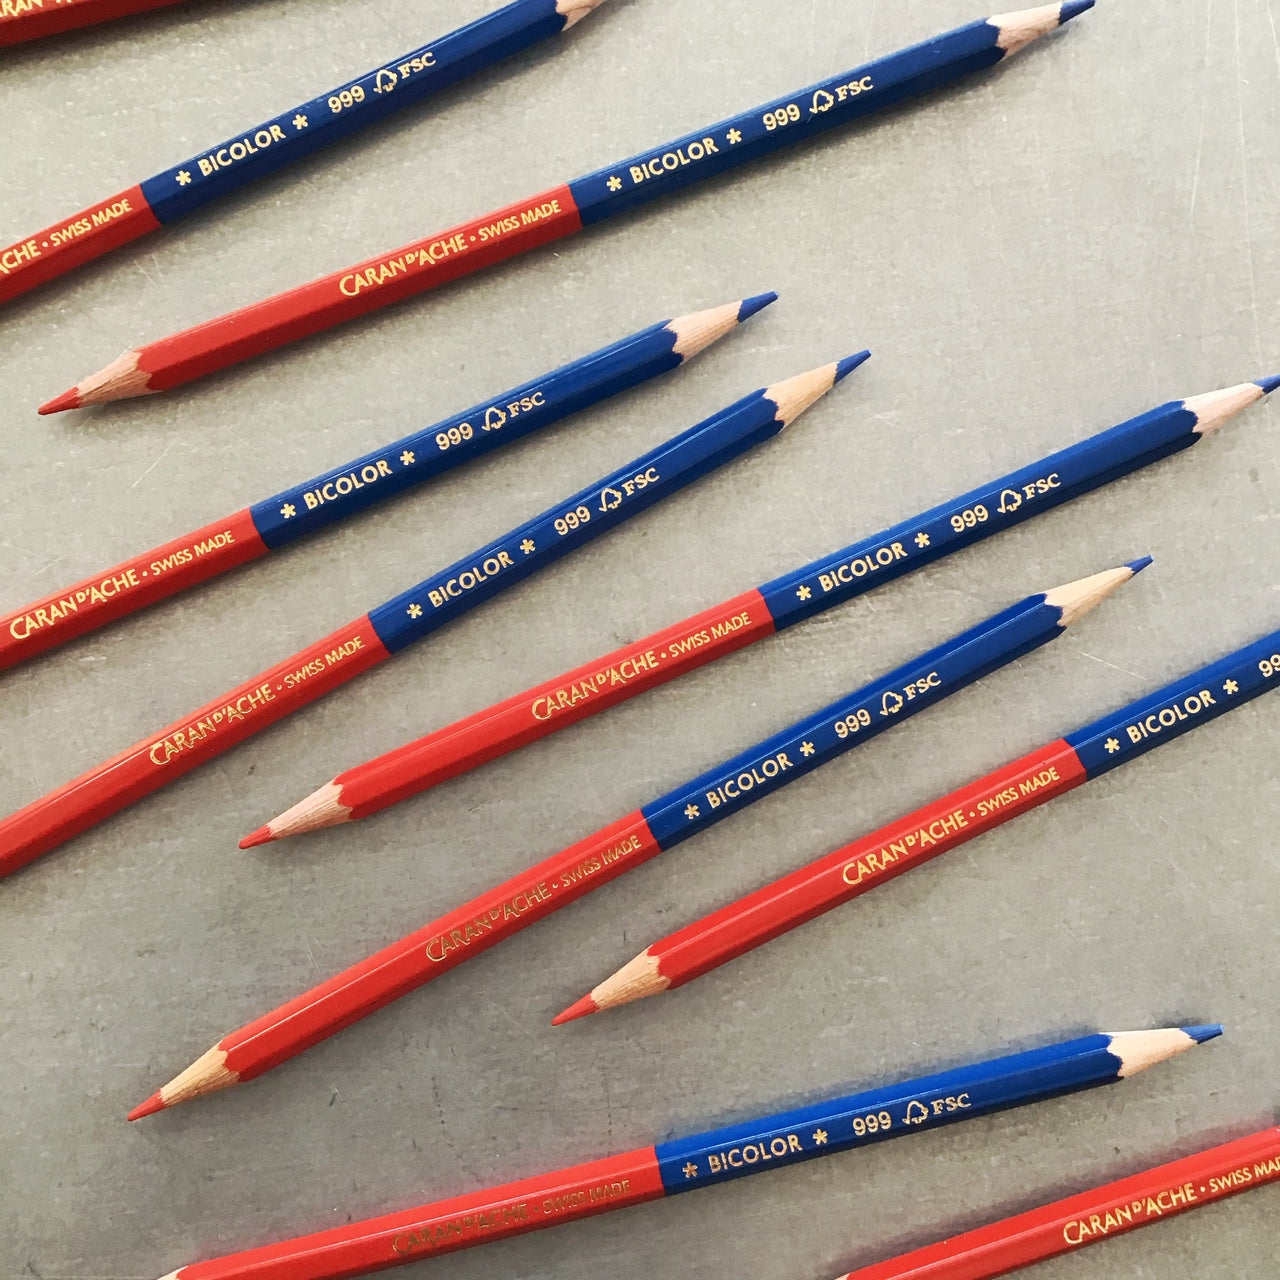 Caran d'Ache Bicolor Pencil- Red and Blue single pencils on a table